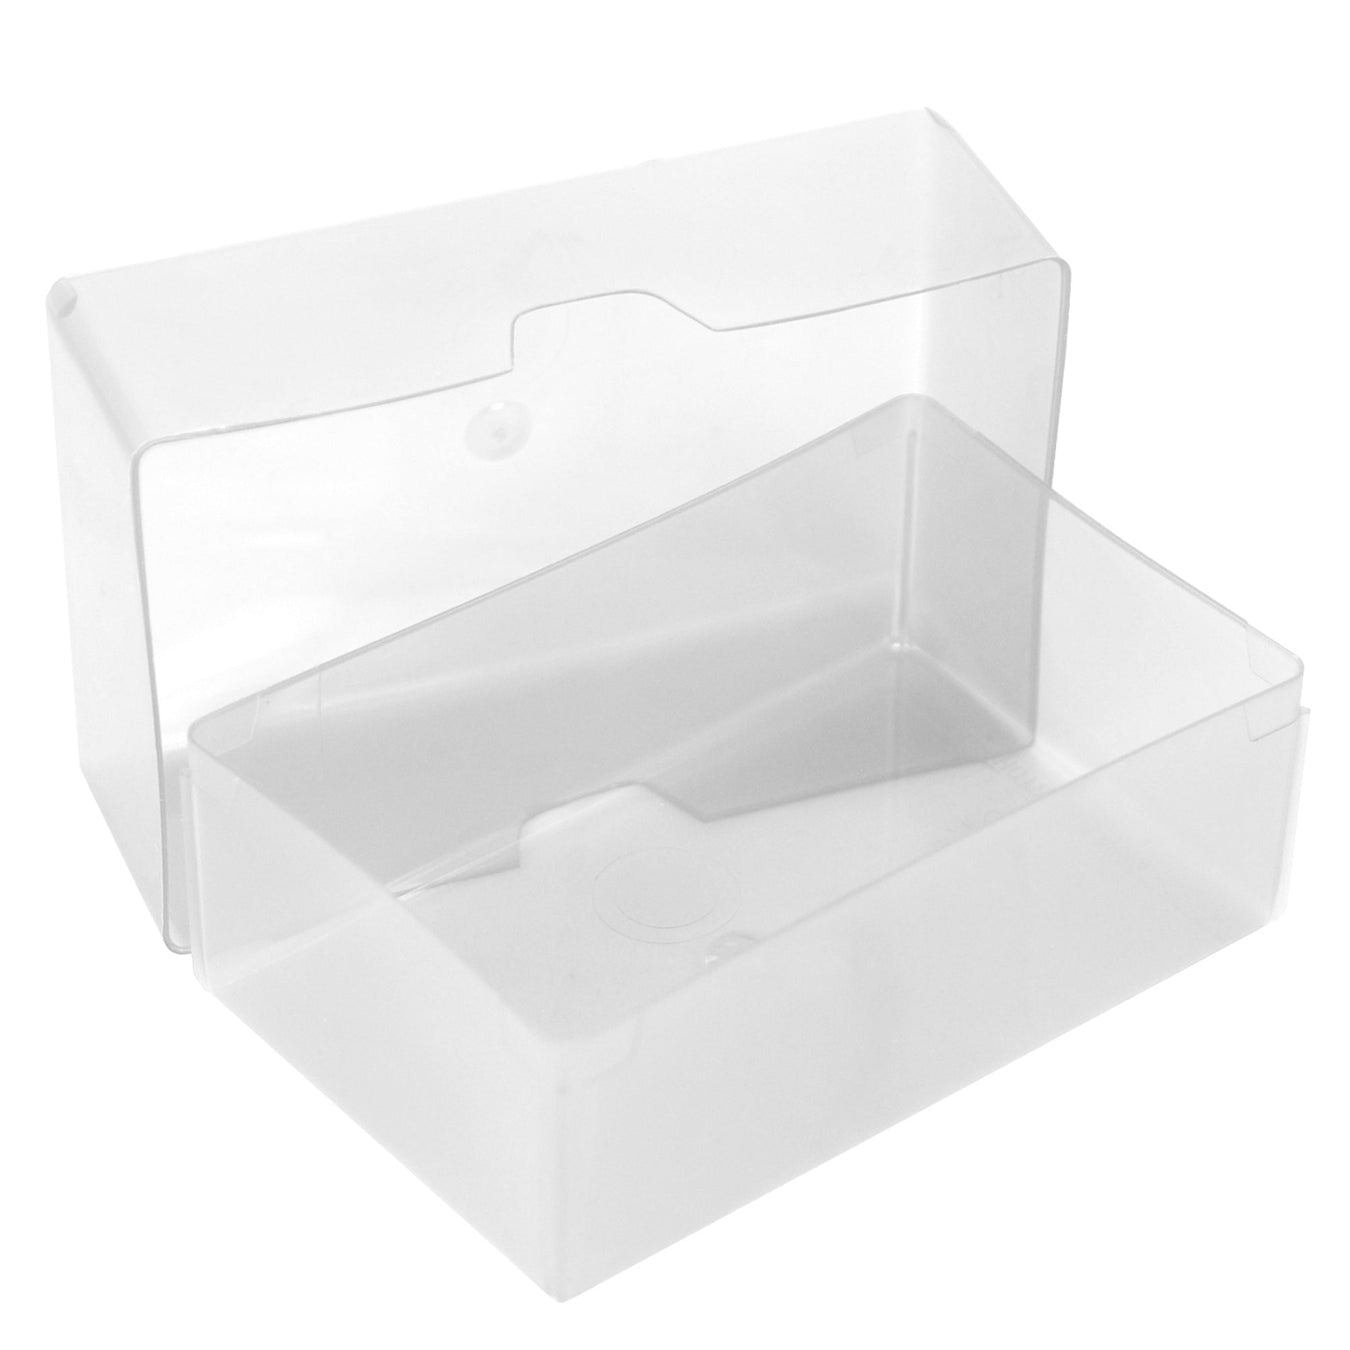 Plastic business card boxes with lids 35mm deep internally